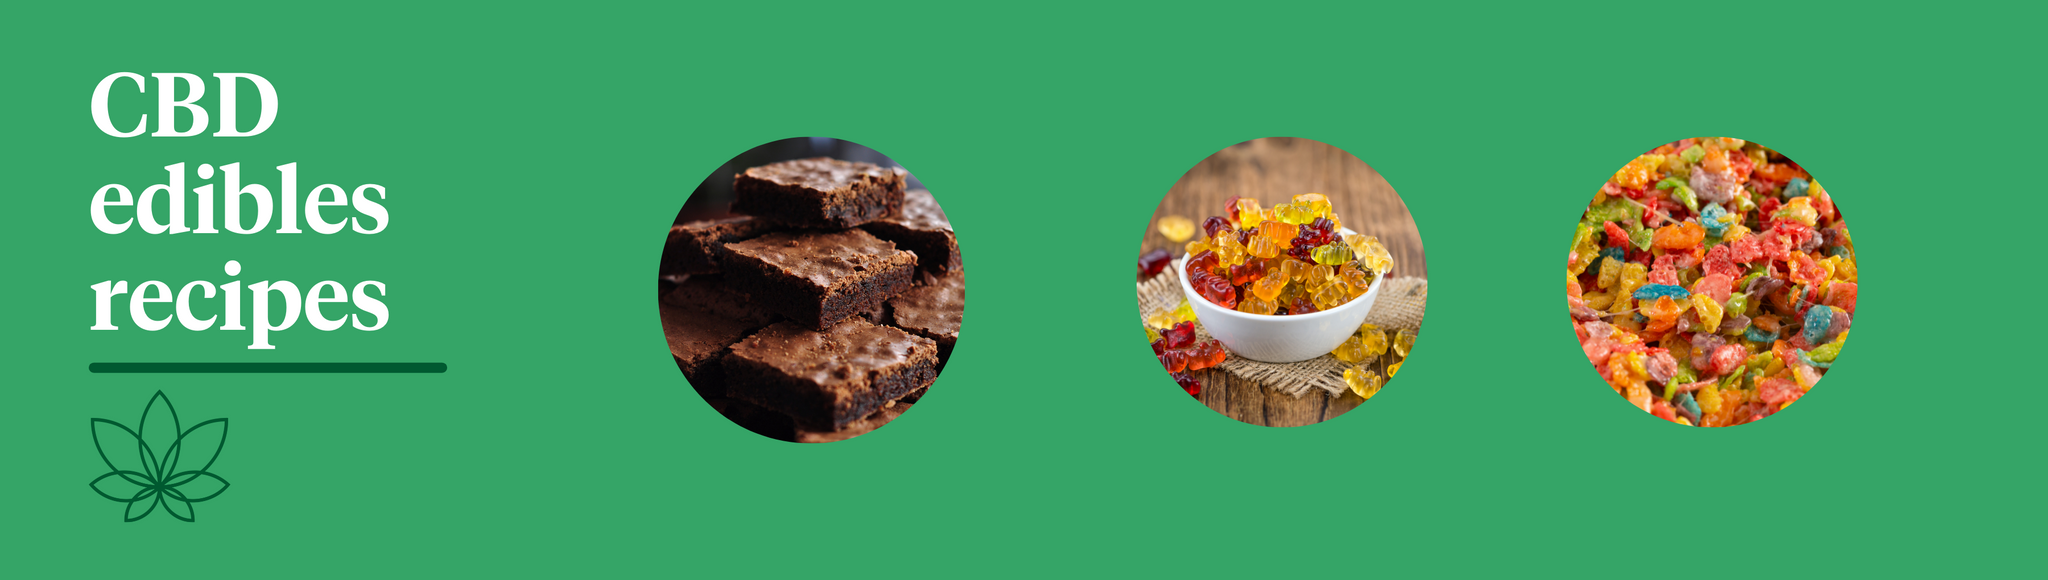 A green background with the Supreme CBD logo showcasing three CBD edibles recipes. One image displaying a stack of brownies, the middle image showing a bowl of gummy bears and the final image displaying a plethora of fruity pebbles.